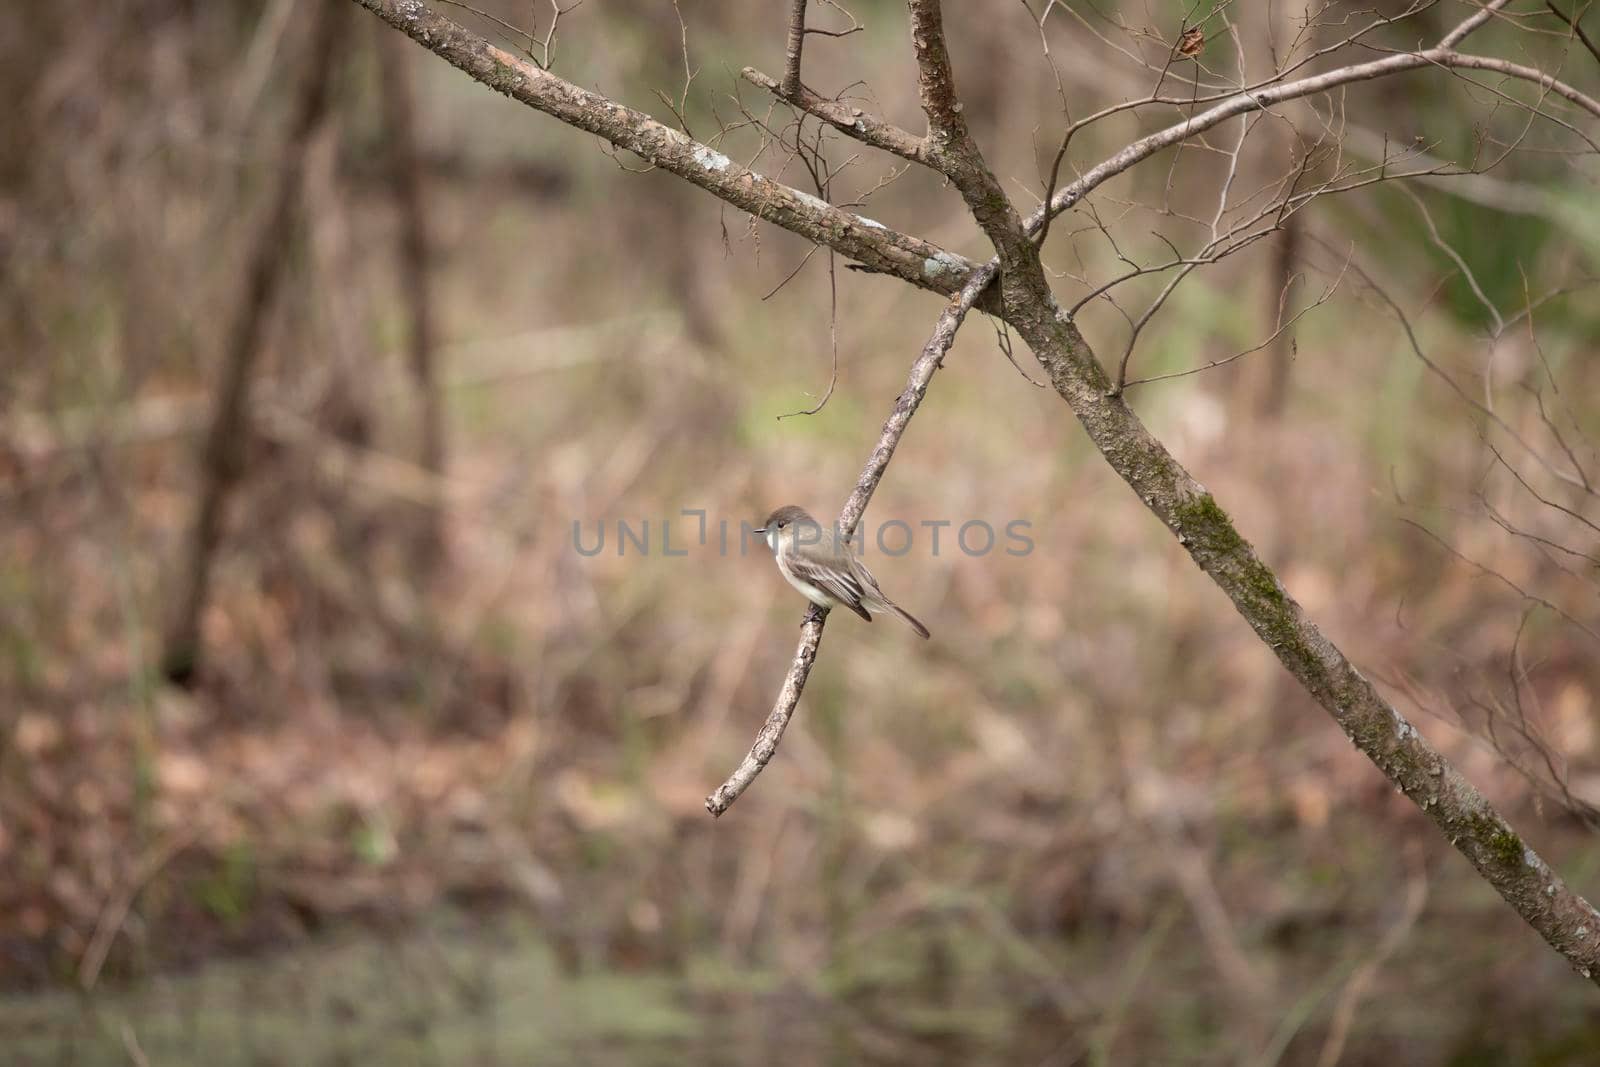 Eastern phoebe (Sayornis phoebe) perched on a small, broken branch